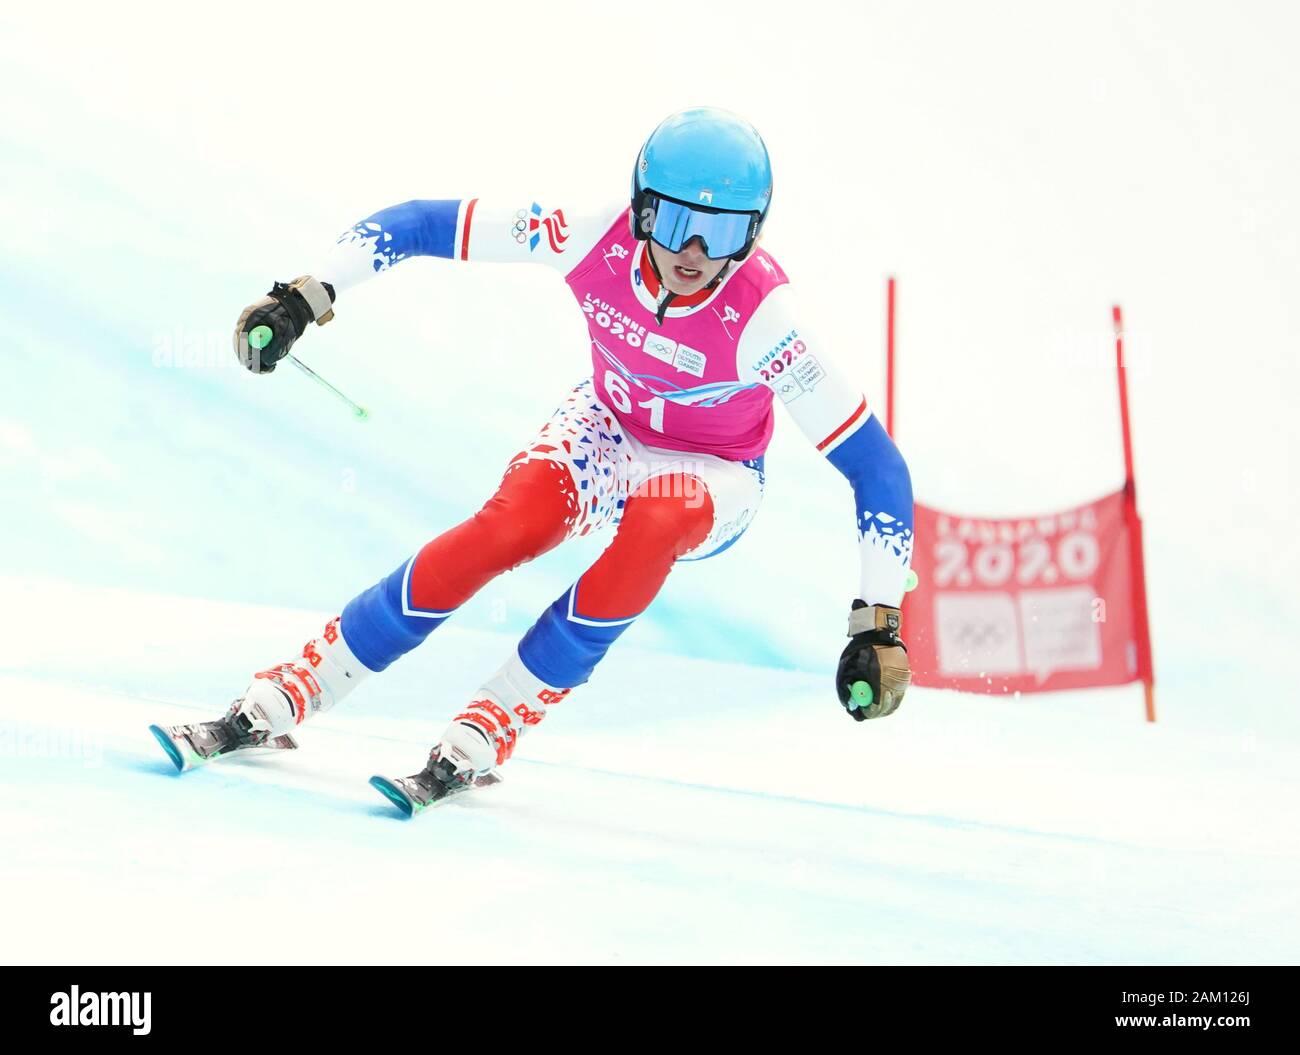 Les Diablerets, Switzerland. 10th Jan, 2020. Gauti Gudmundsson of Iceland competes during the Men's Super-G of Alpine Skiing at the 3rd Winter Youth Olympic Games (YOG) at Les Diablerets Alpine centre, Switzerland, on Jan. 10, 2020. Credit: Wang Qingqin/Xinhua/Alamy Live News Stock Photo